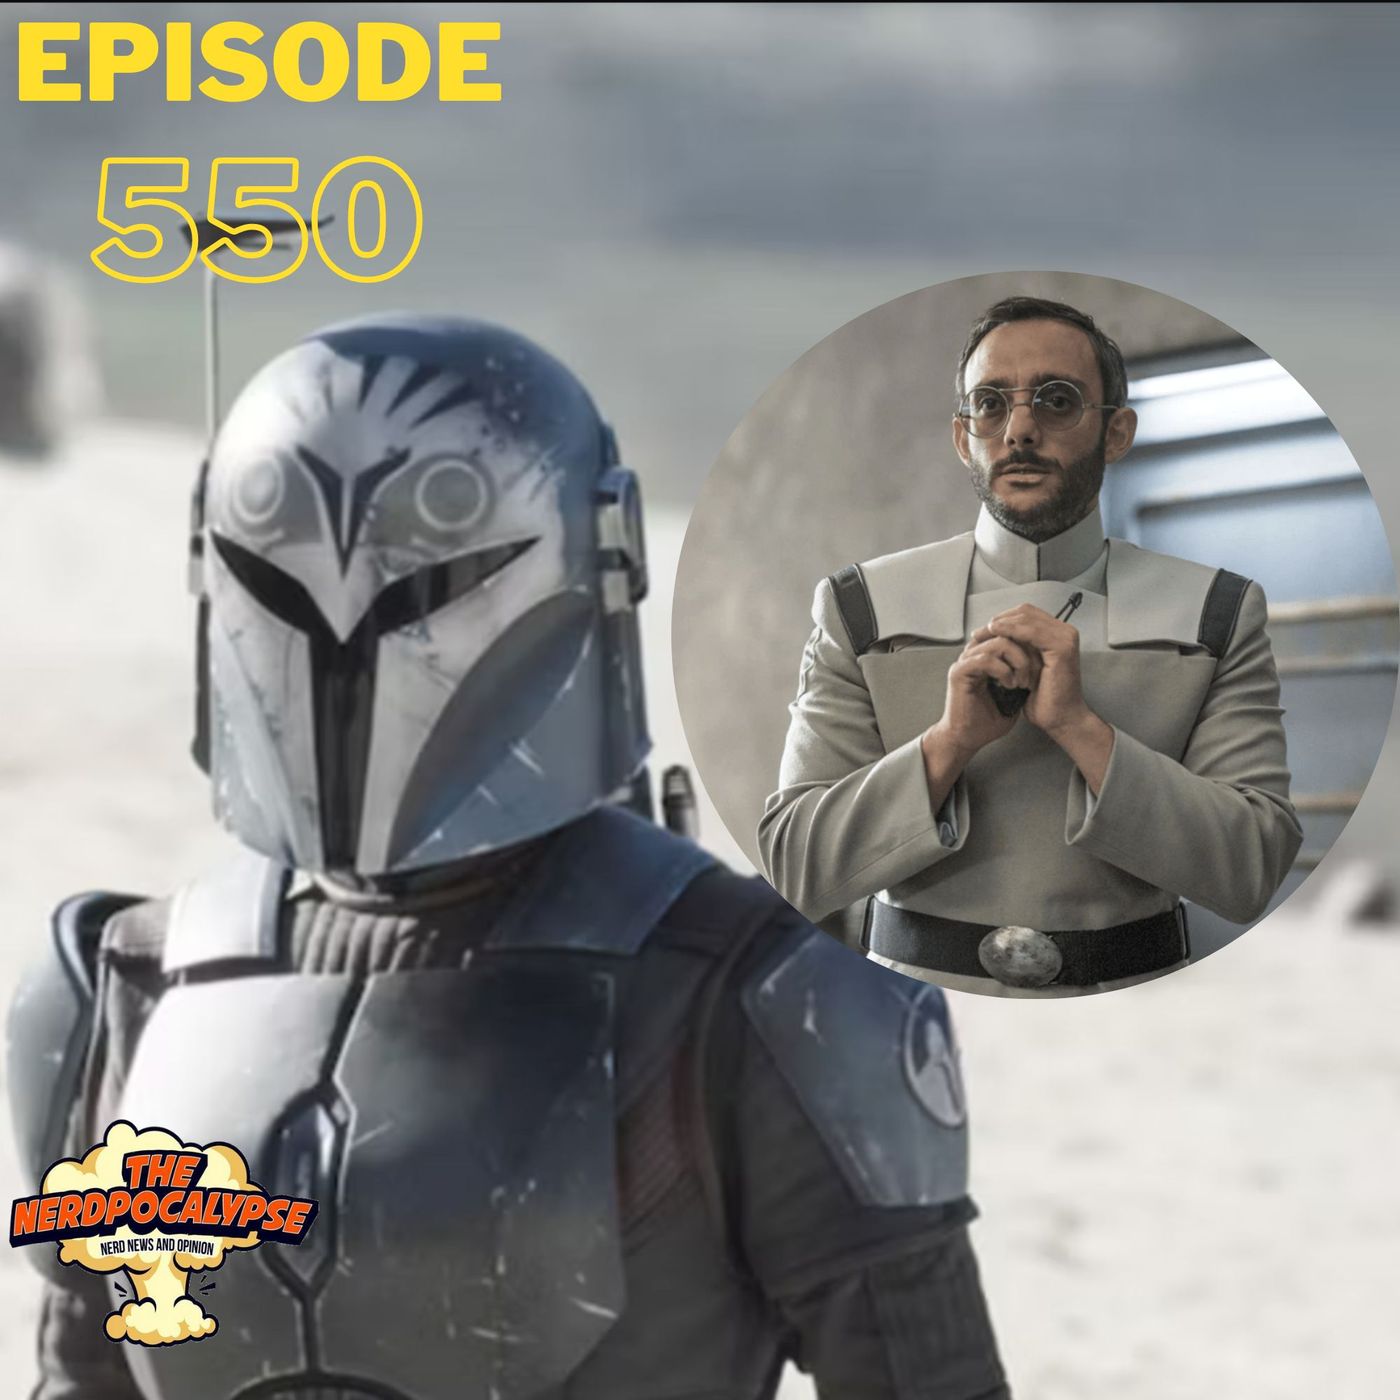 Episode 550: Don’t Do That, Please! (The Last of Us, The Mandalorian, & Oscars 2023 Results)